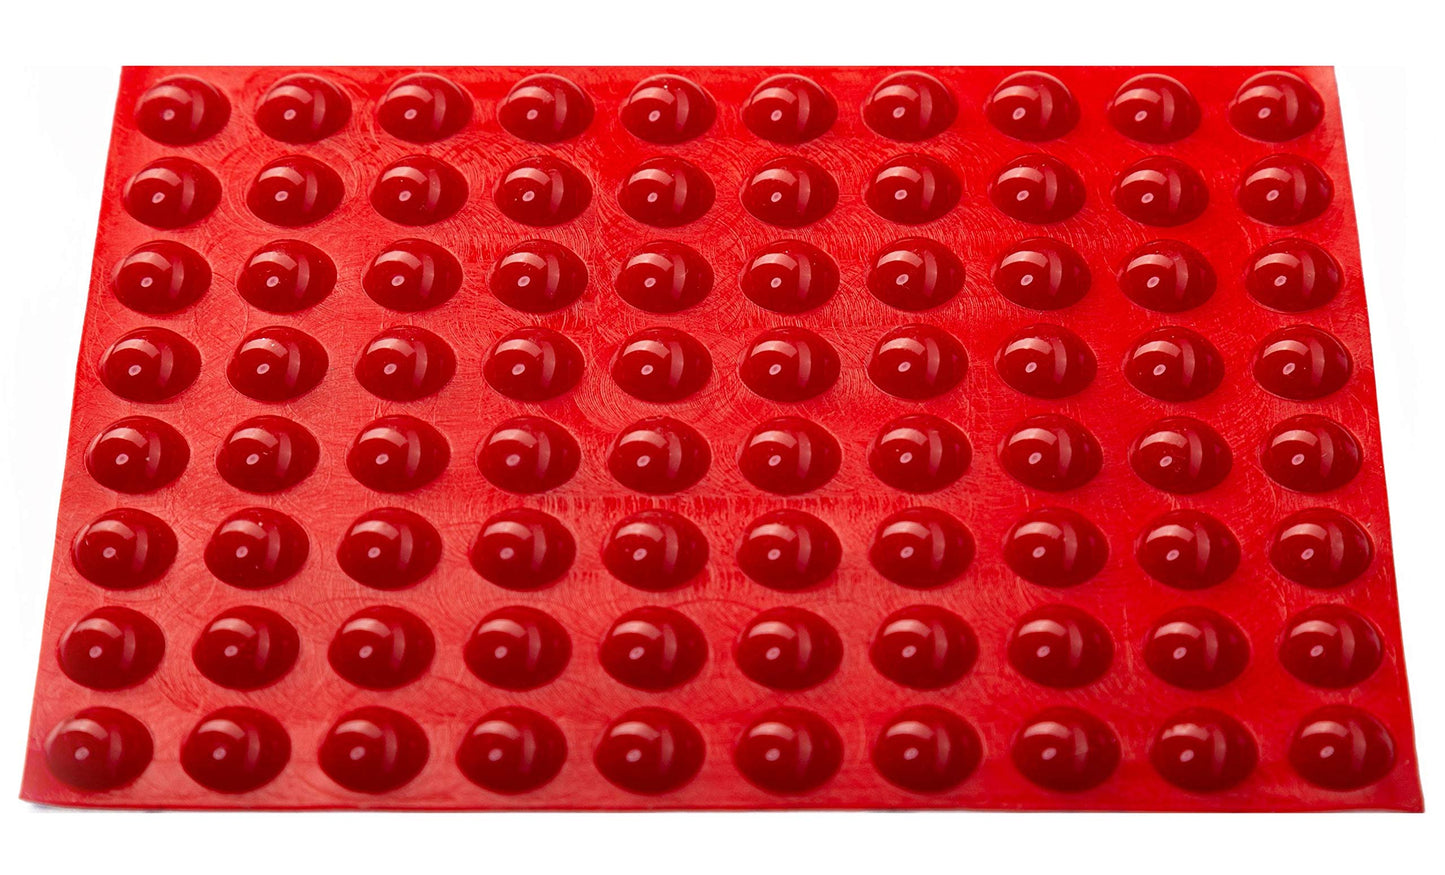 Mix of Silicone Sticky Tactile Bump dots for Visually impaired, Blind or Low Vision (144)